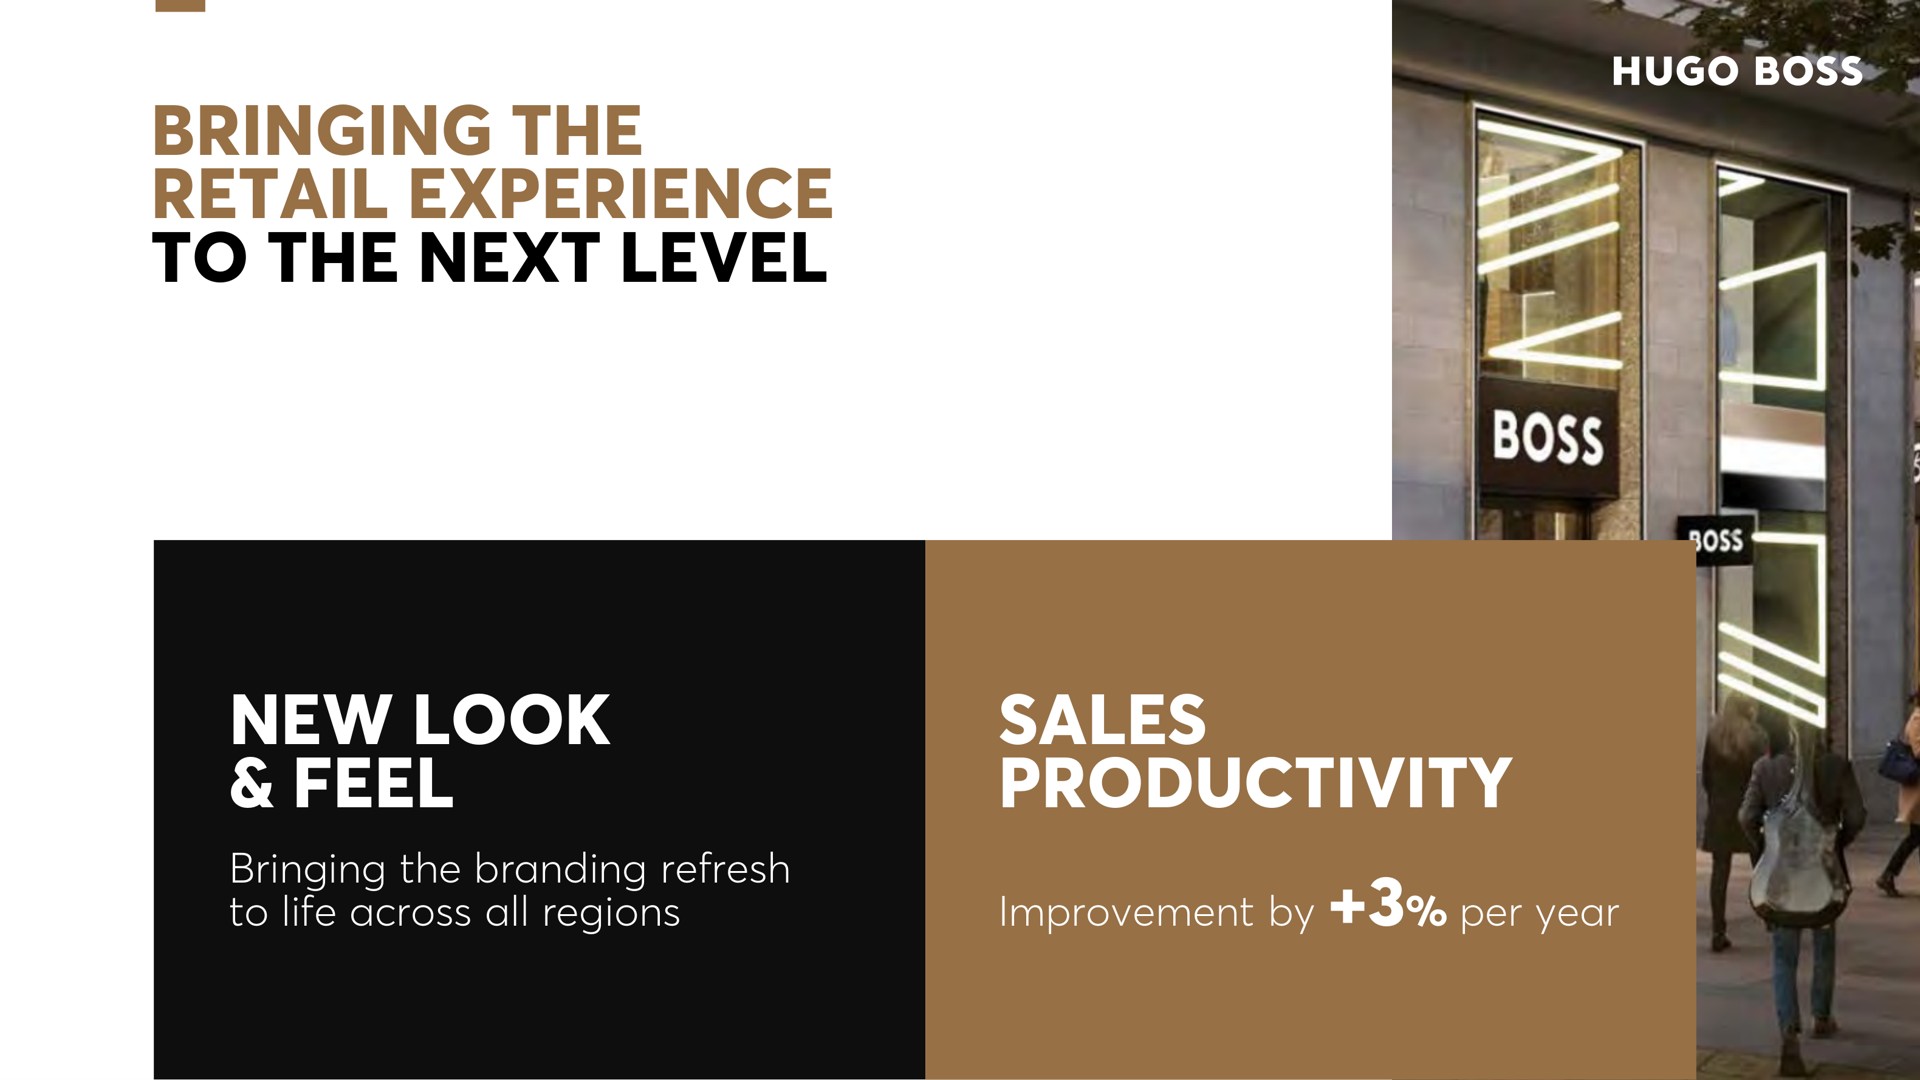 bringing the retail experience to the next level new look feel sales productivity | Hugo Boss